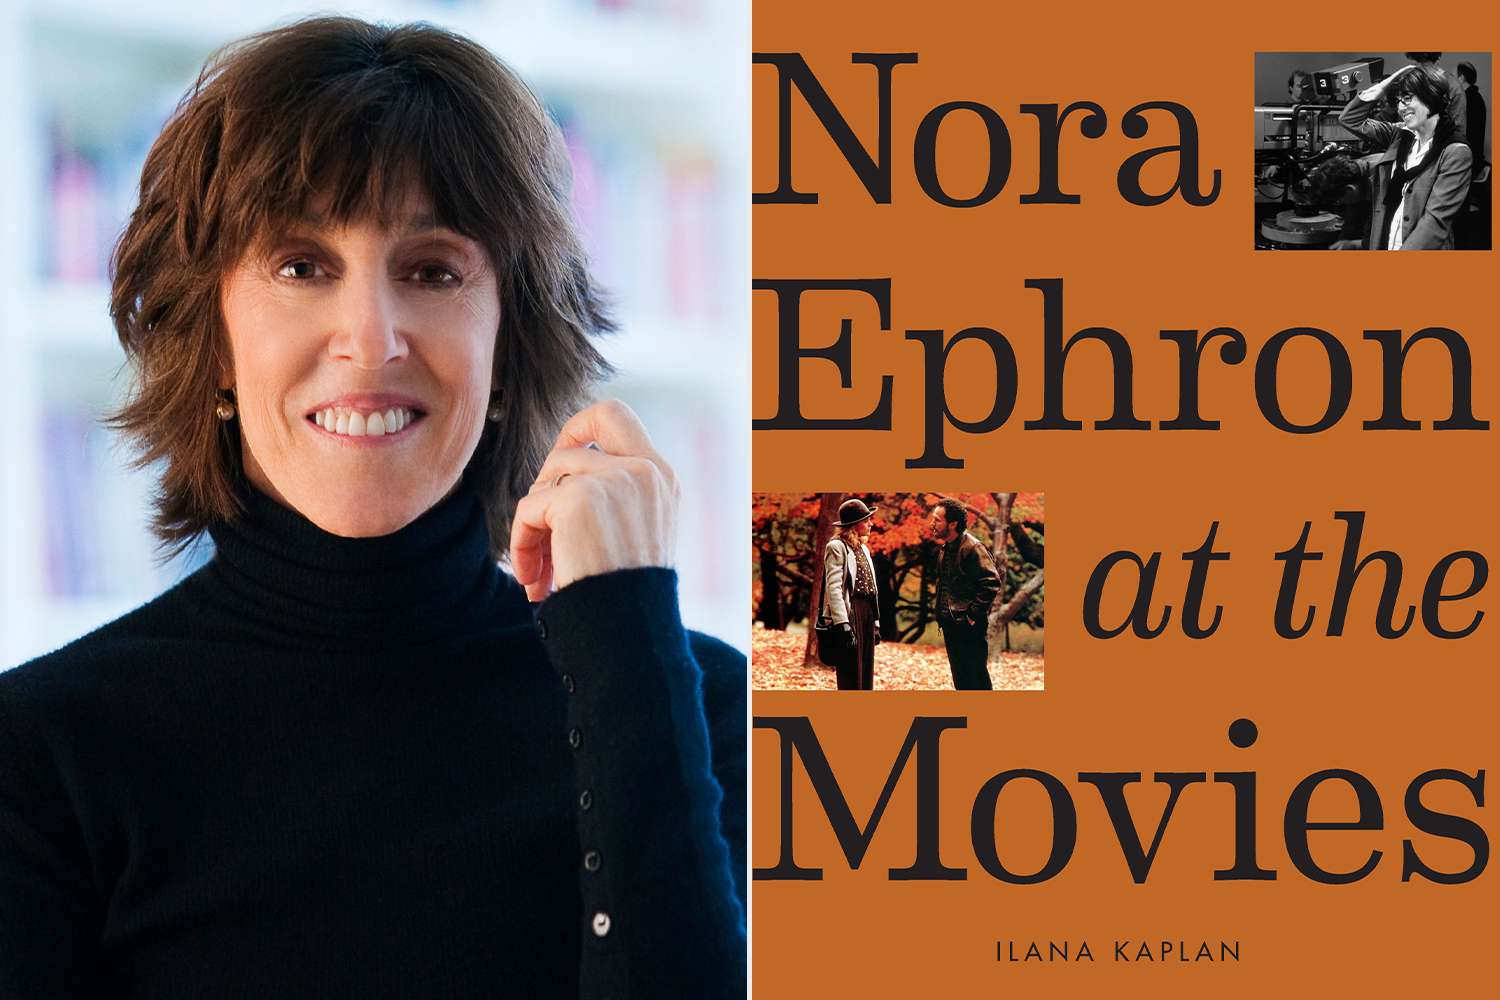 “nora ephron at the movies” explores the queen of rom-com's outsize influence: read an excerpt here (exclusive)